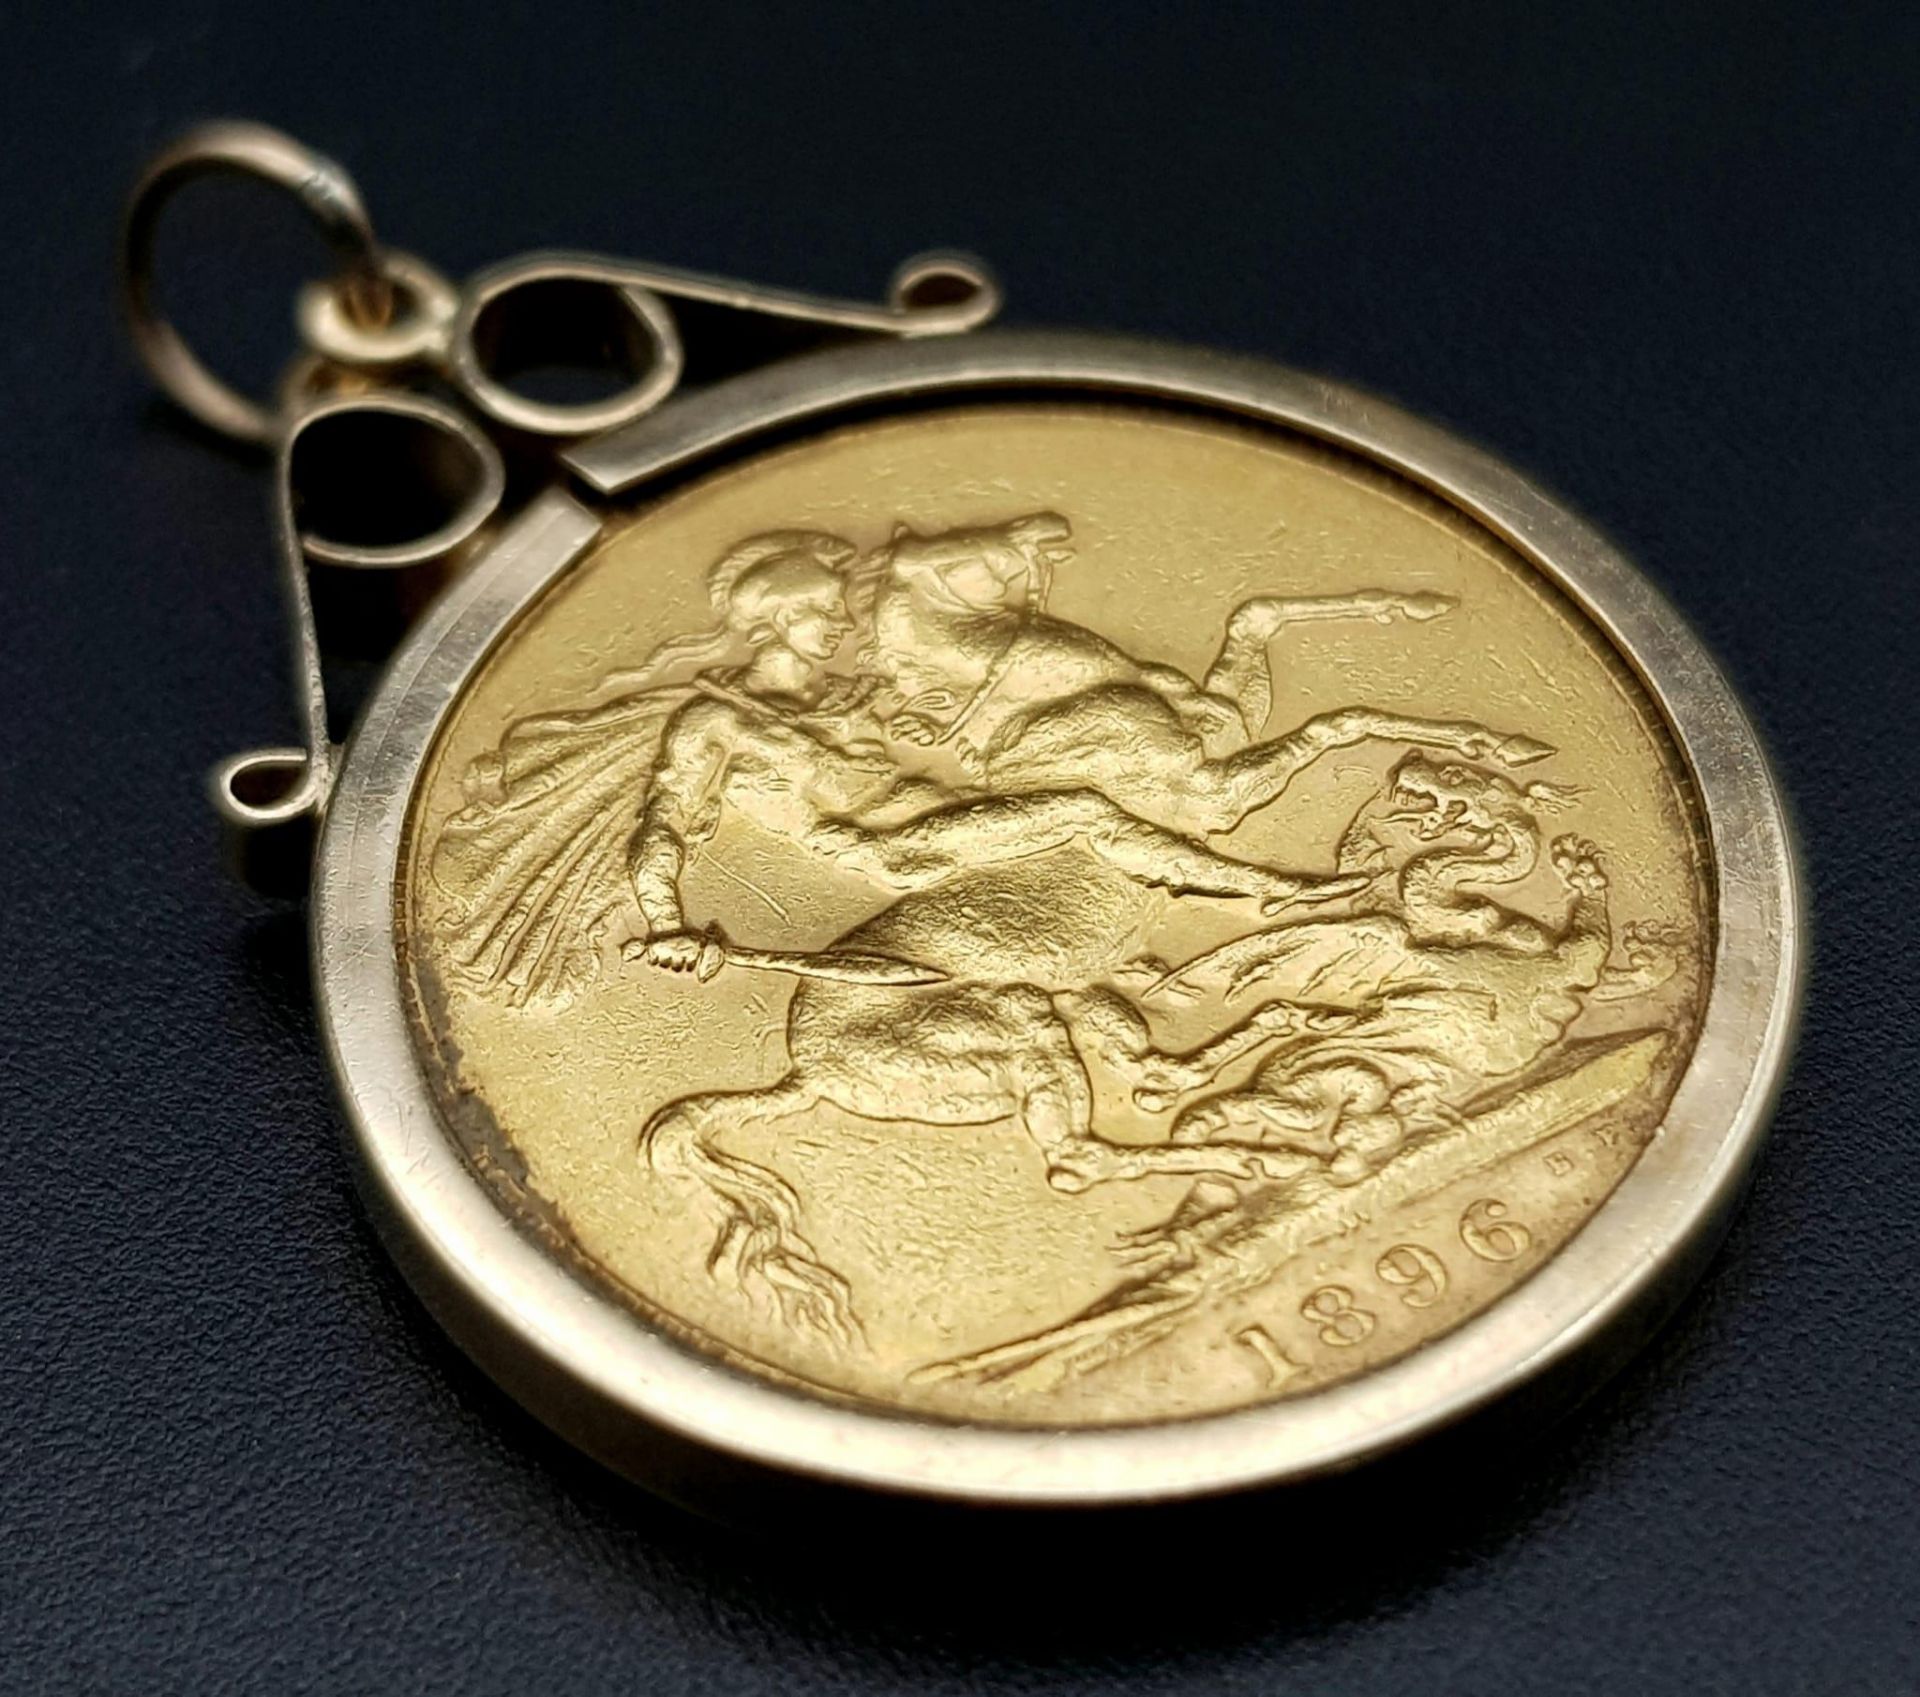 An 1896 Queen Victoria 22K Gold Full Sovereign in a 9K Gold Casing. 9.47g total weight.